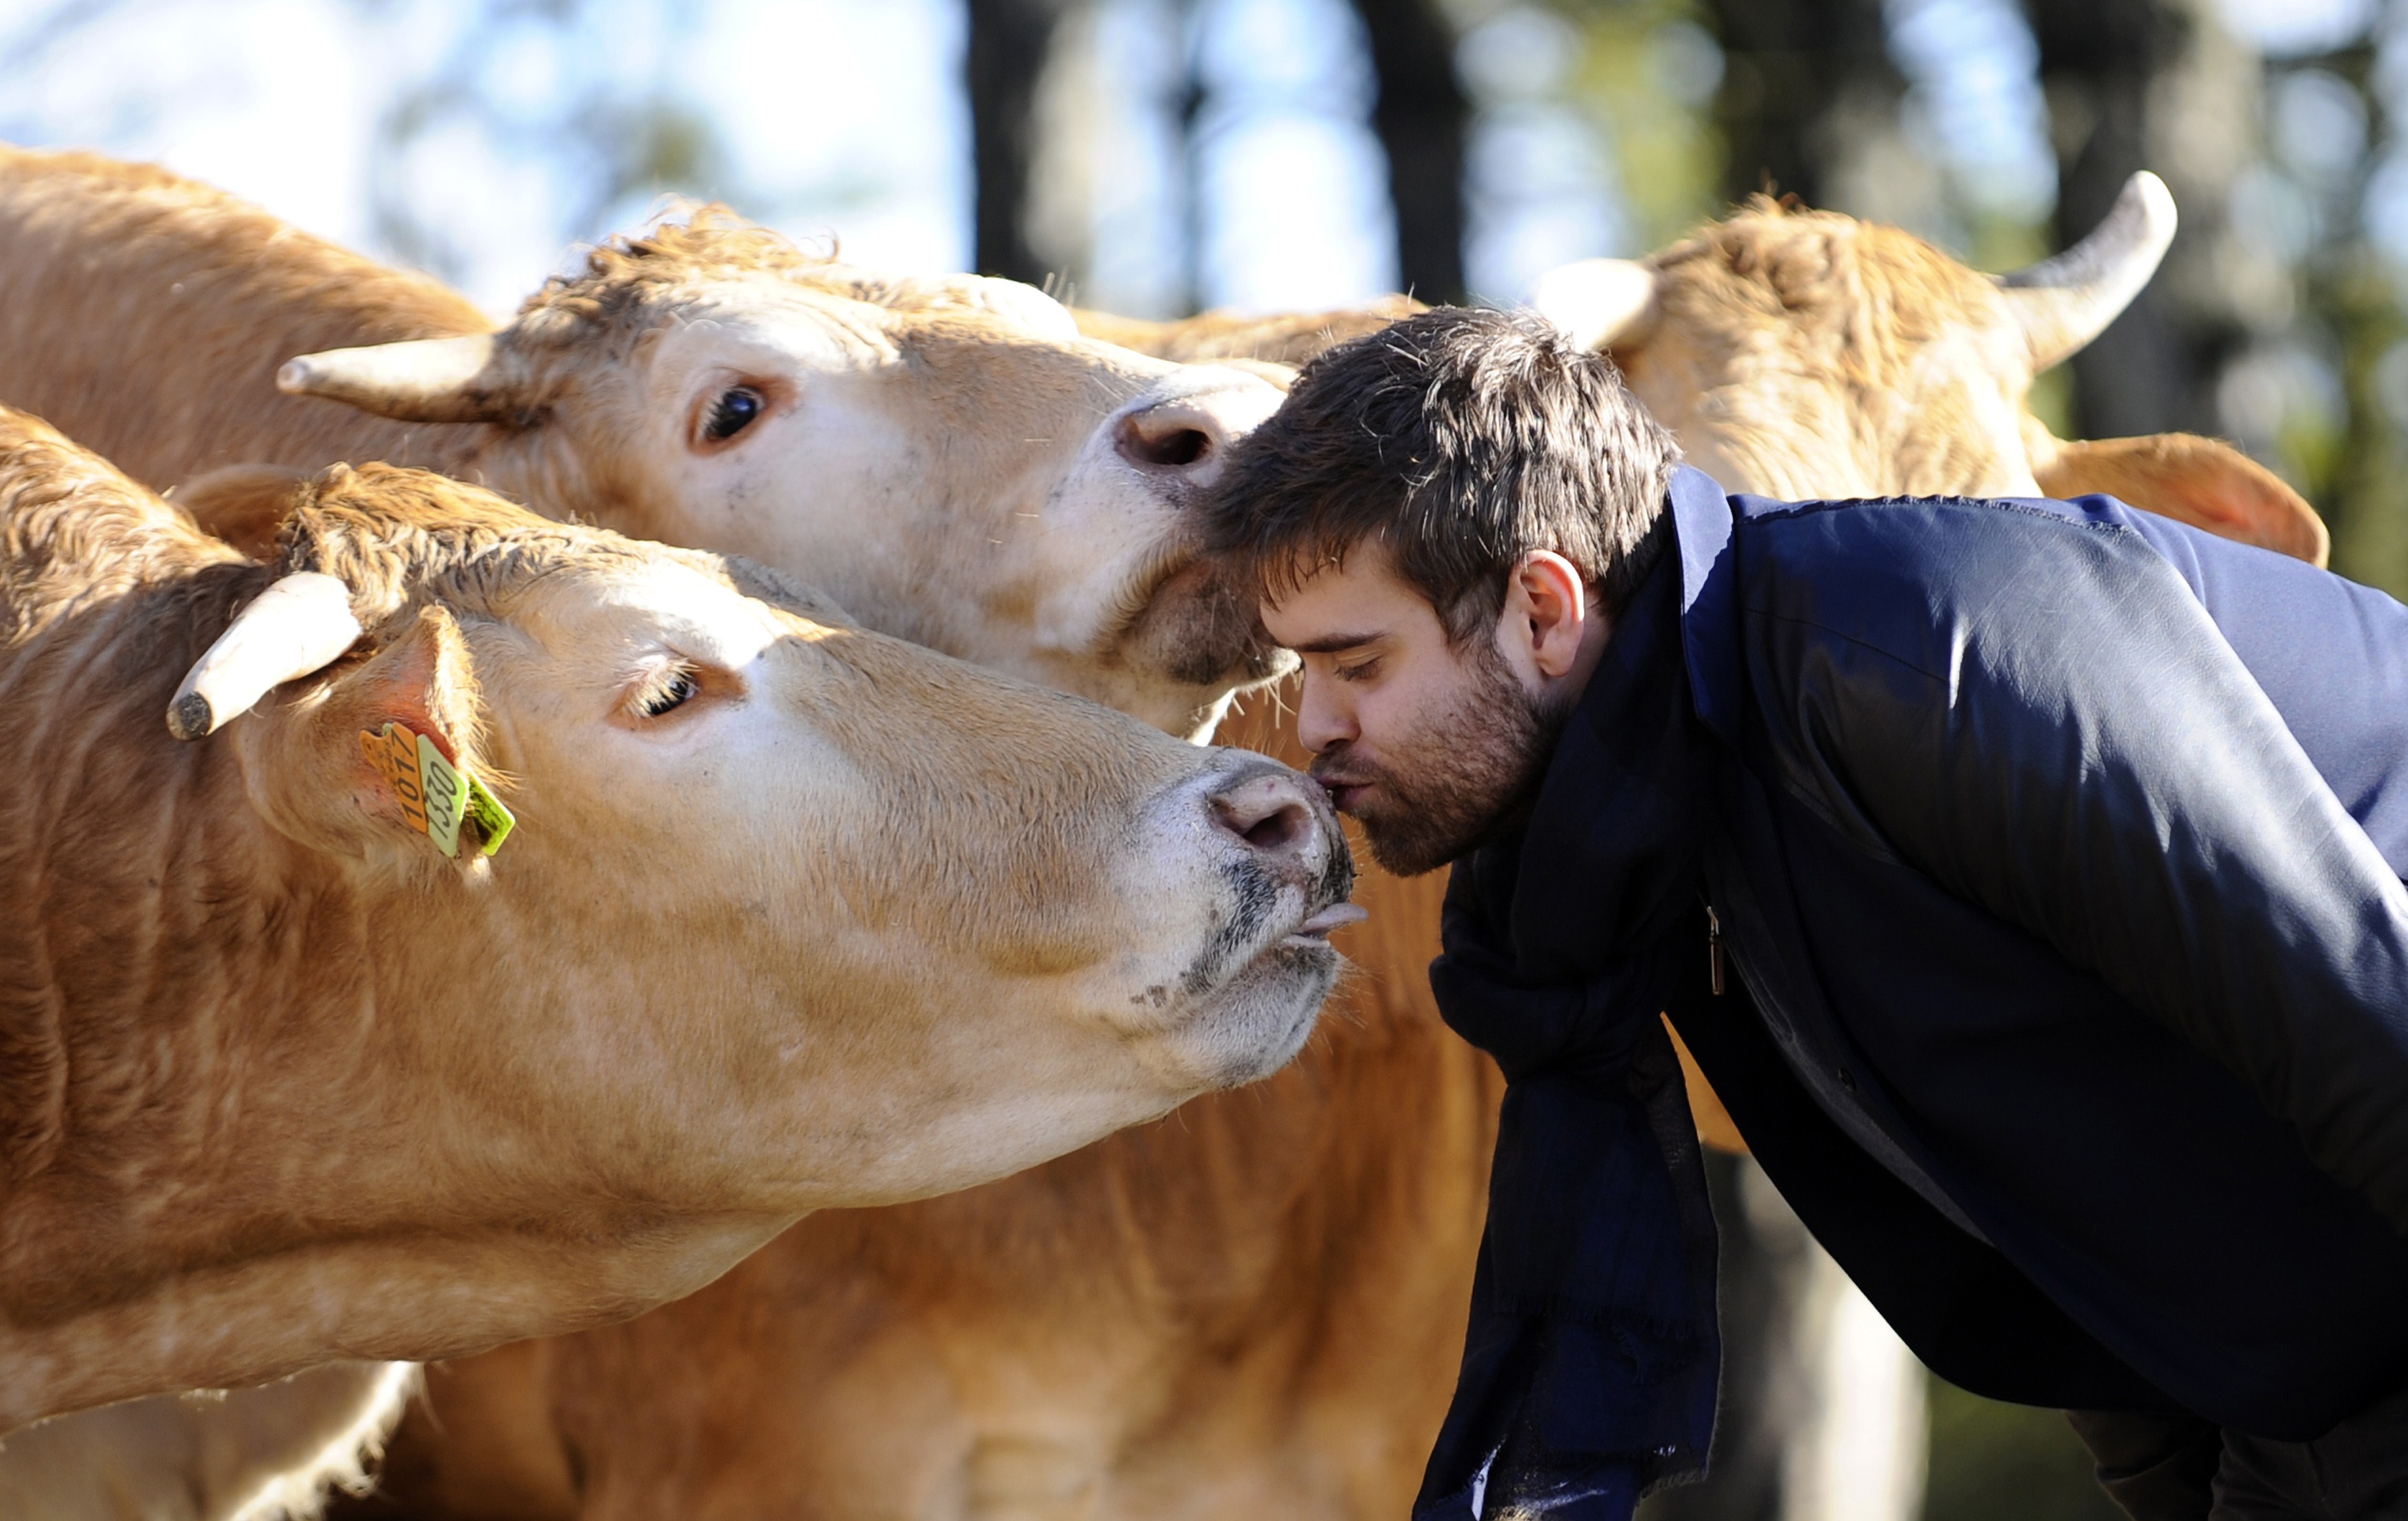 Cows of the Blonde d'Aquitaine breed of the French breeder and butcher Alexandre Polmard (R) are pictured on February 23, 2015 in Saint-Mihiel, eastern France. (Jean-Christophe Verhaegen—AFP/Getty Images)